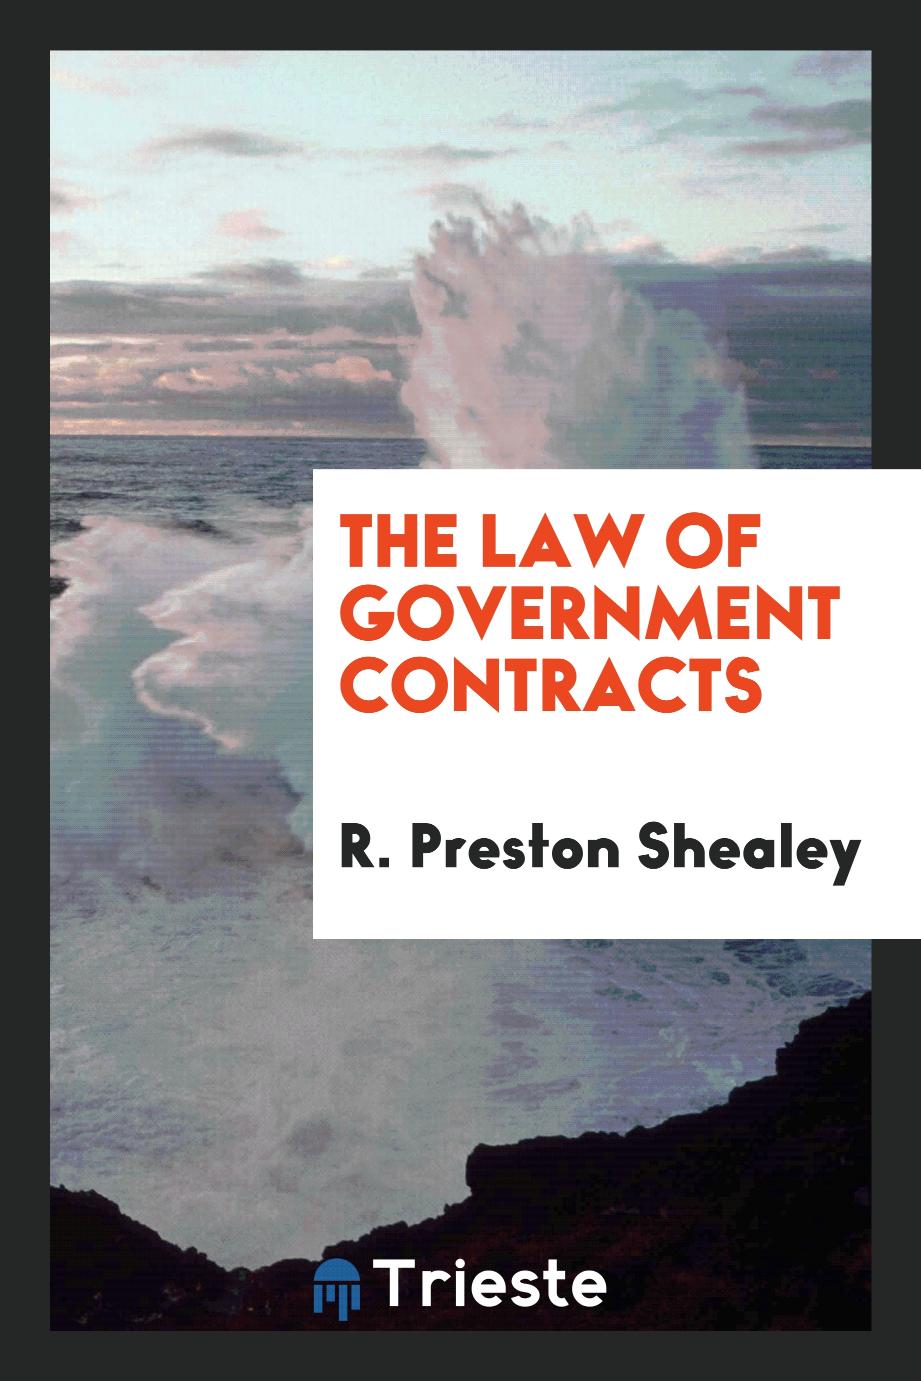 The Law of Government Contracts